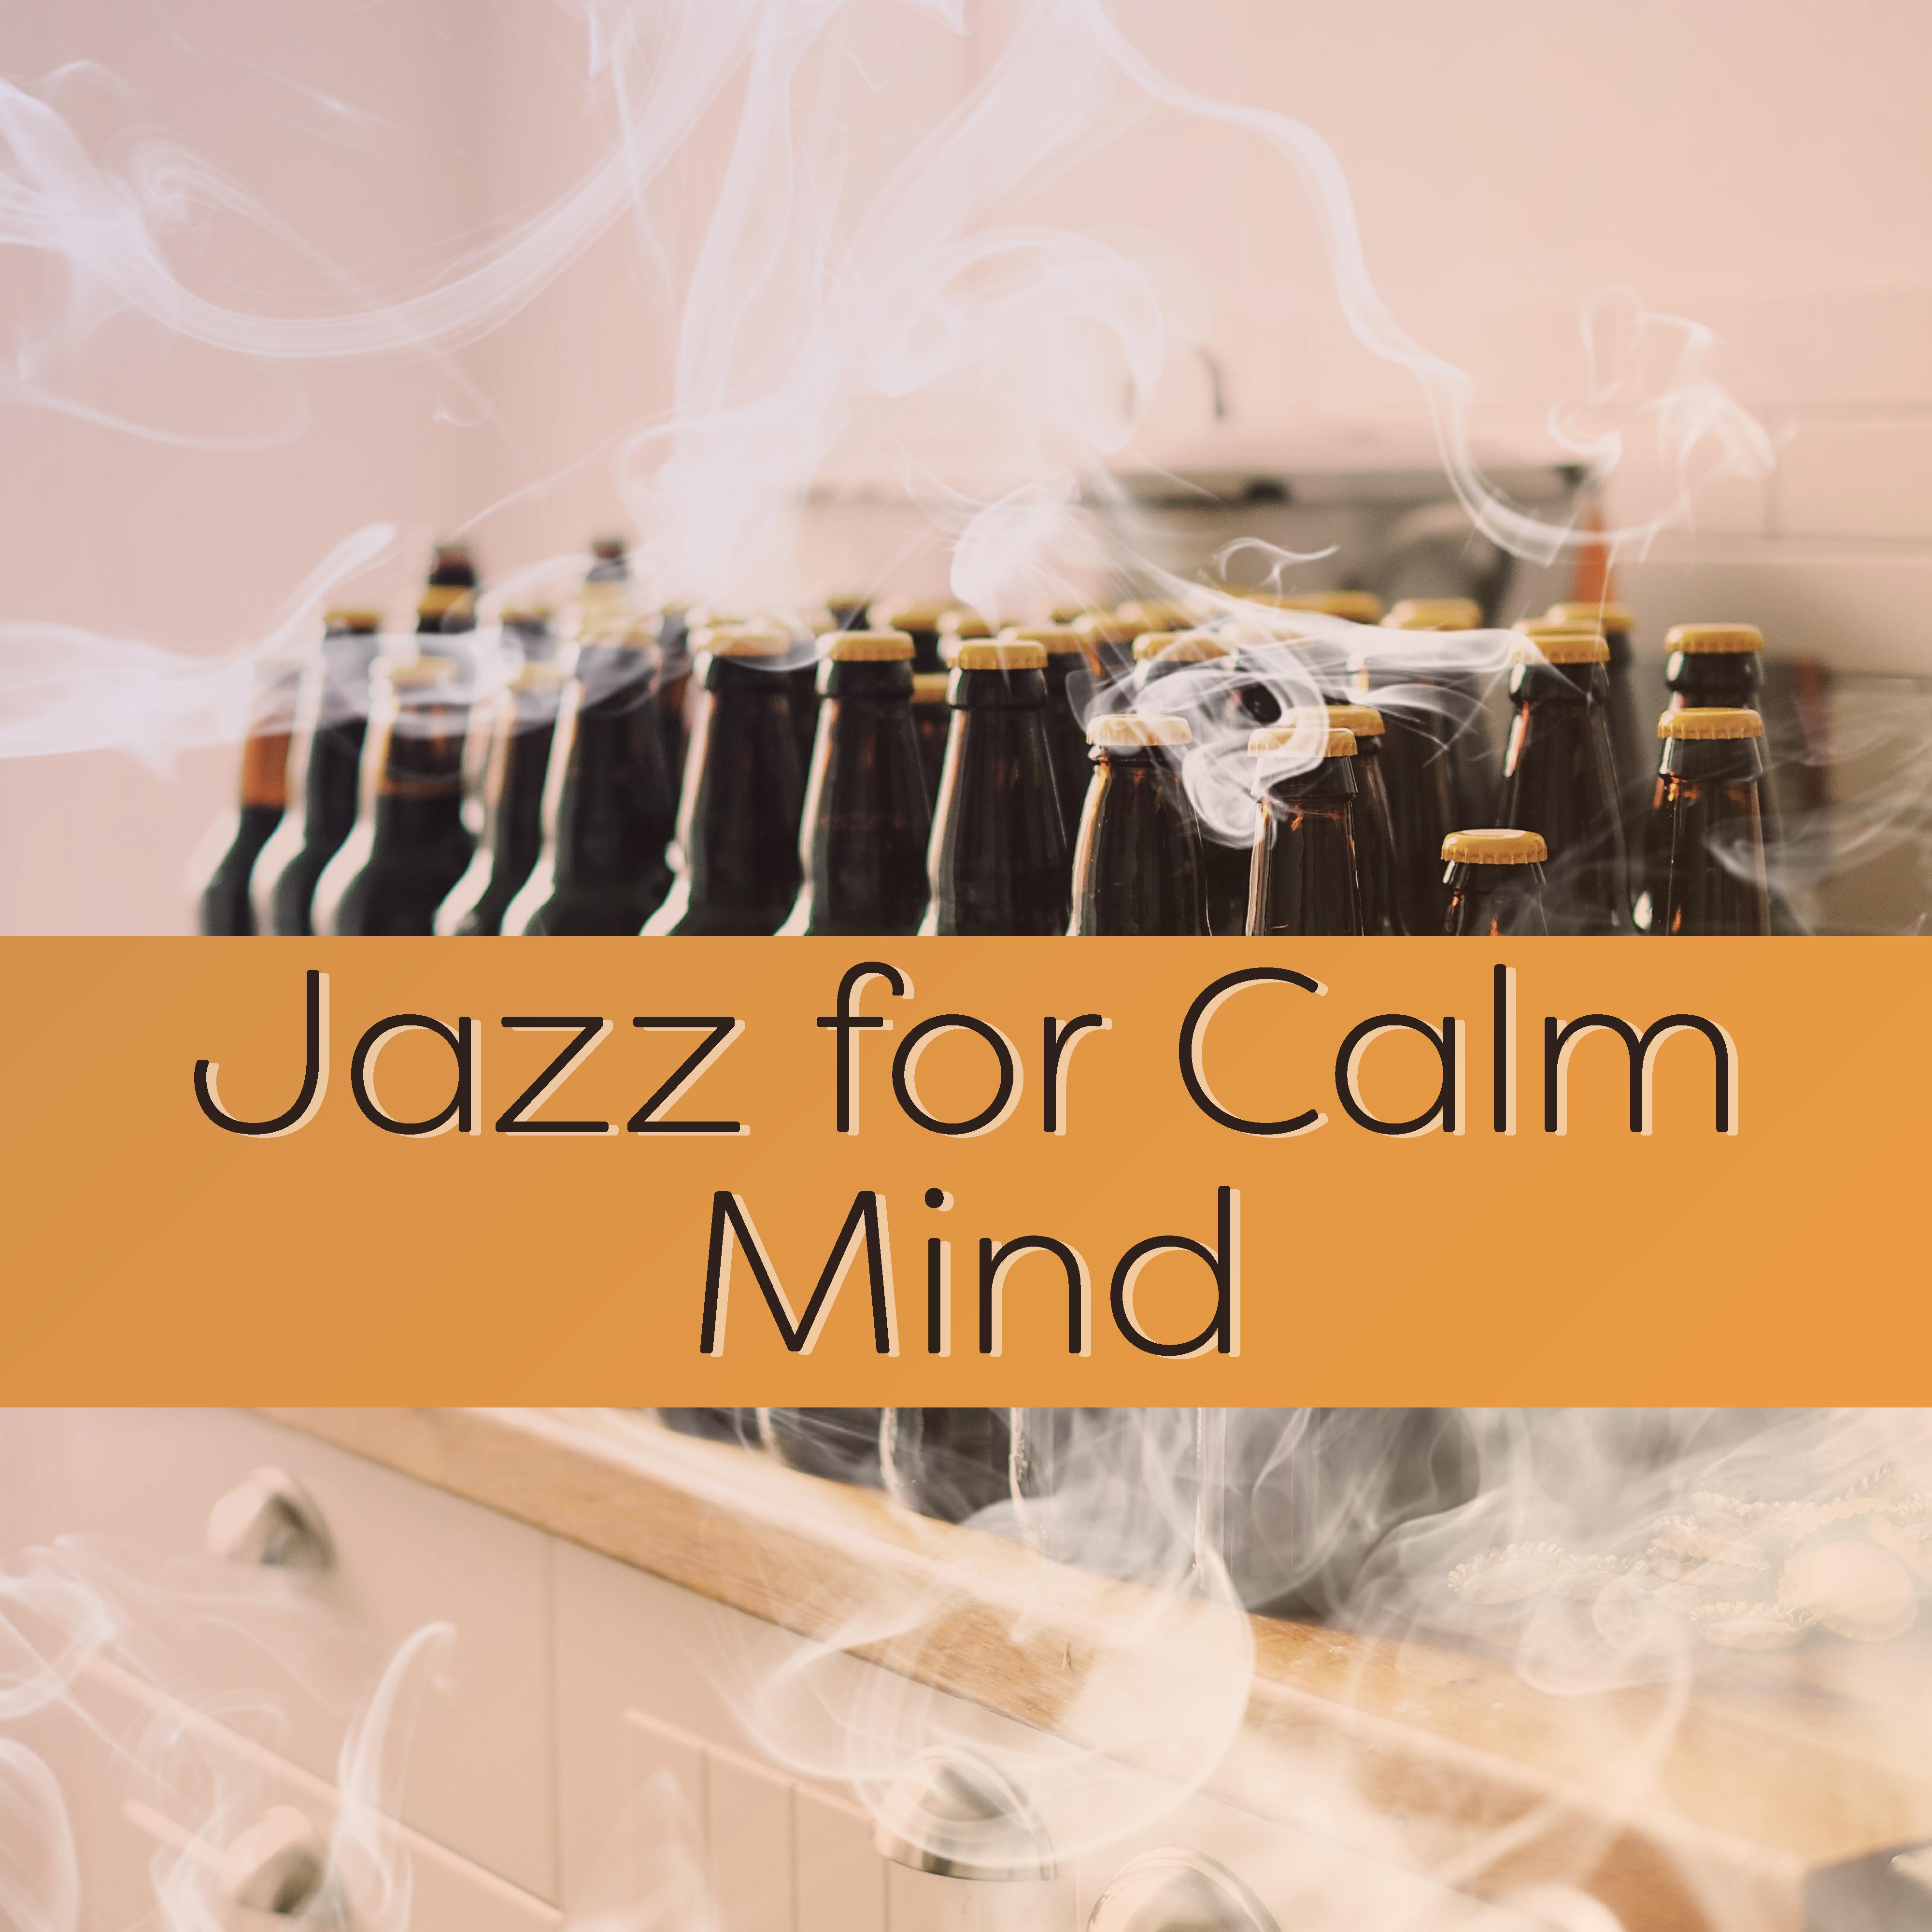 Jazz for Calm Mind  Smooth Sounds of Jazz, Easy Listening, Stress Free, Mind Peace, Chilled Piano